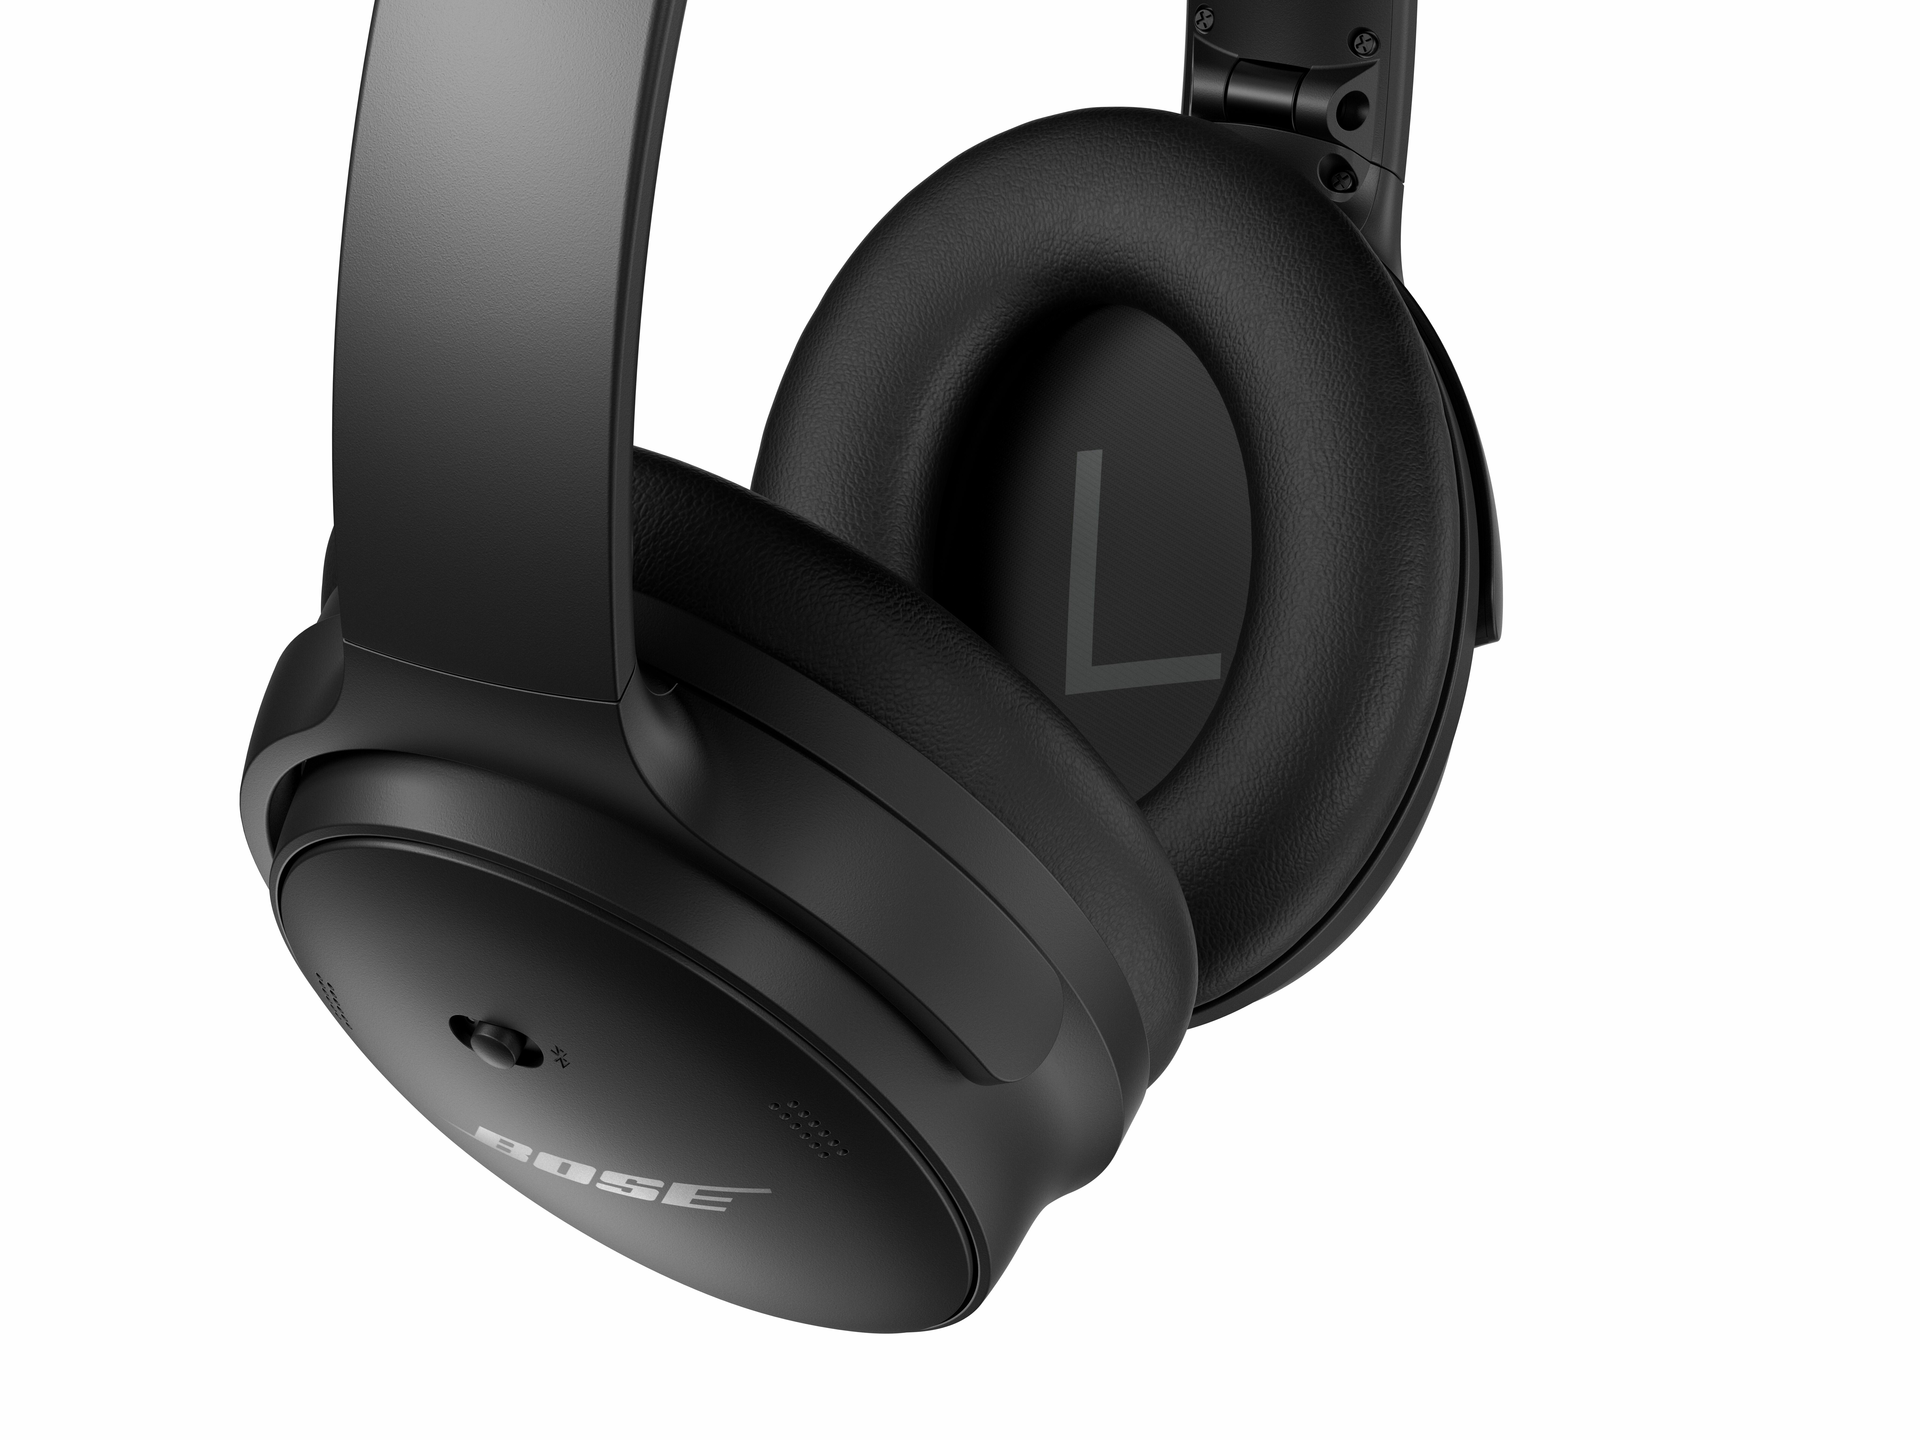 3 Months Warranty】Bose QuietComfort 45 (QC45) Wireless Bluetooth Headphone  Over-The-Ear Noise Canceling Headphones for IOS/Android Built-in Microphone  24-hour Battery Life Bass-heavy Headphones Bose Bluetooth Headphone